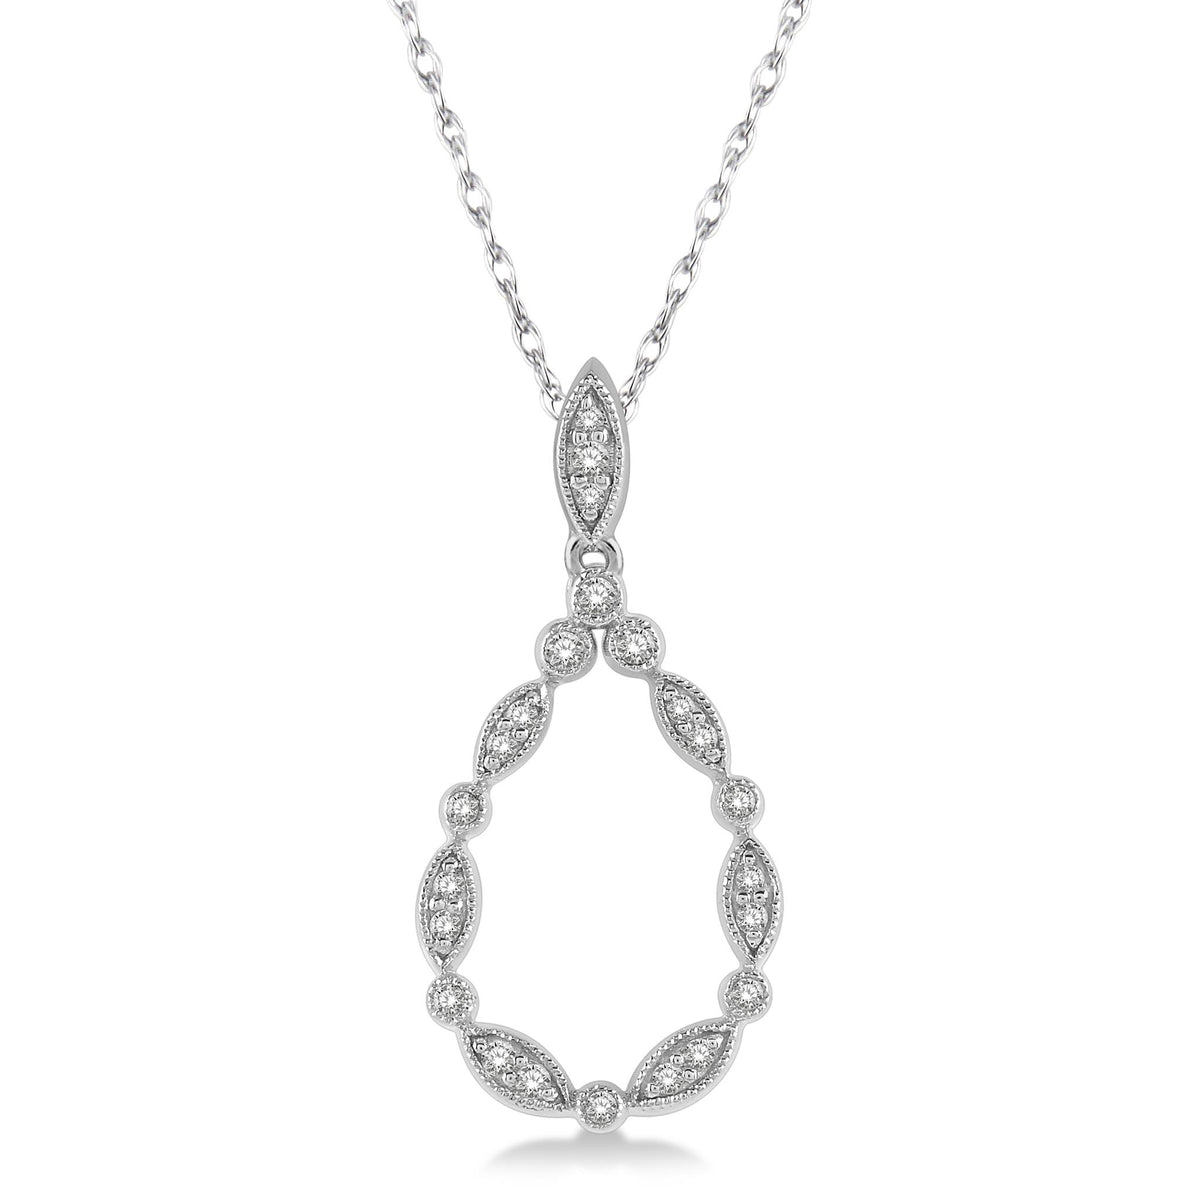 14Kt White Gold Vintage-Inspired Pendant with .13cttw Natural Diamonds